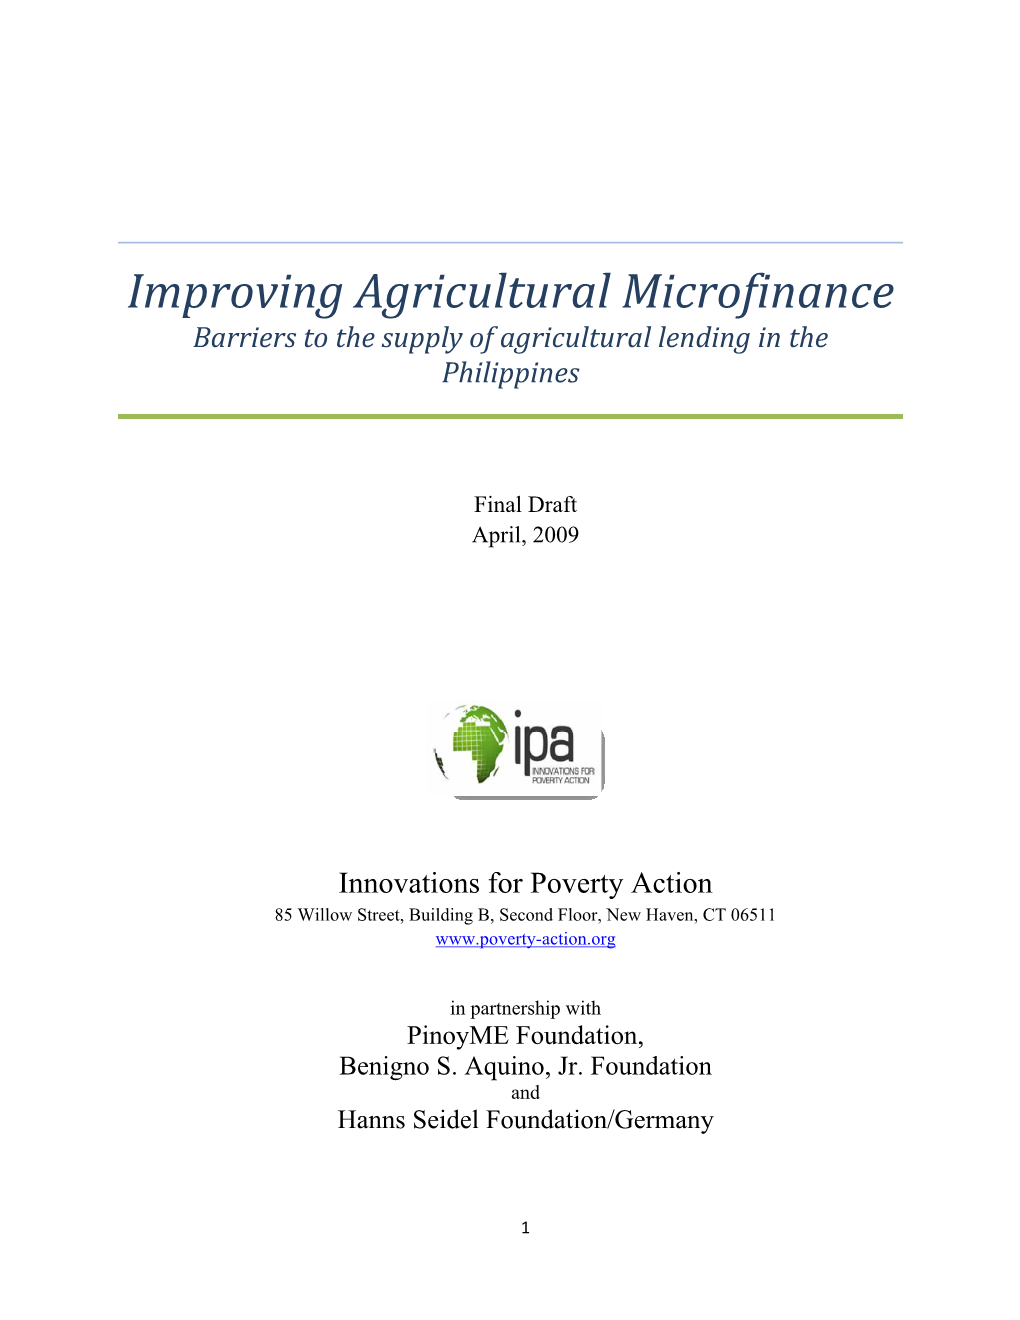 Improving Agricultural Microfinance Barriers to the Supply of Agricultural Lending in the Philippines